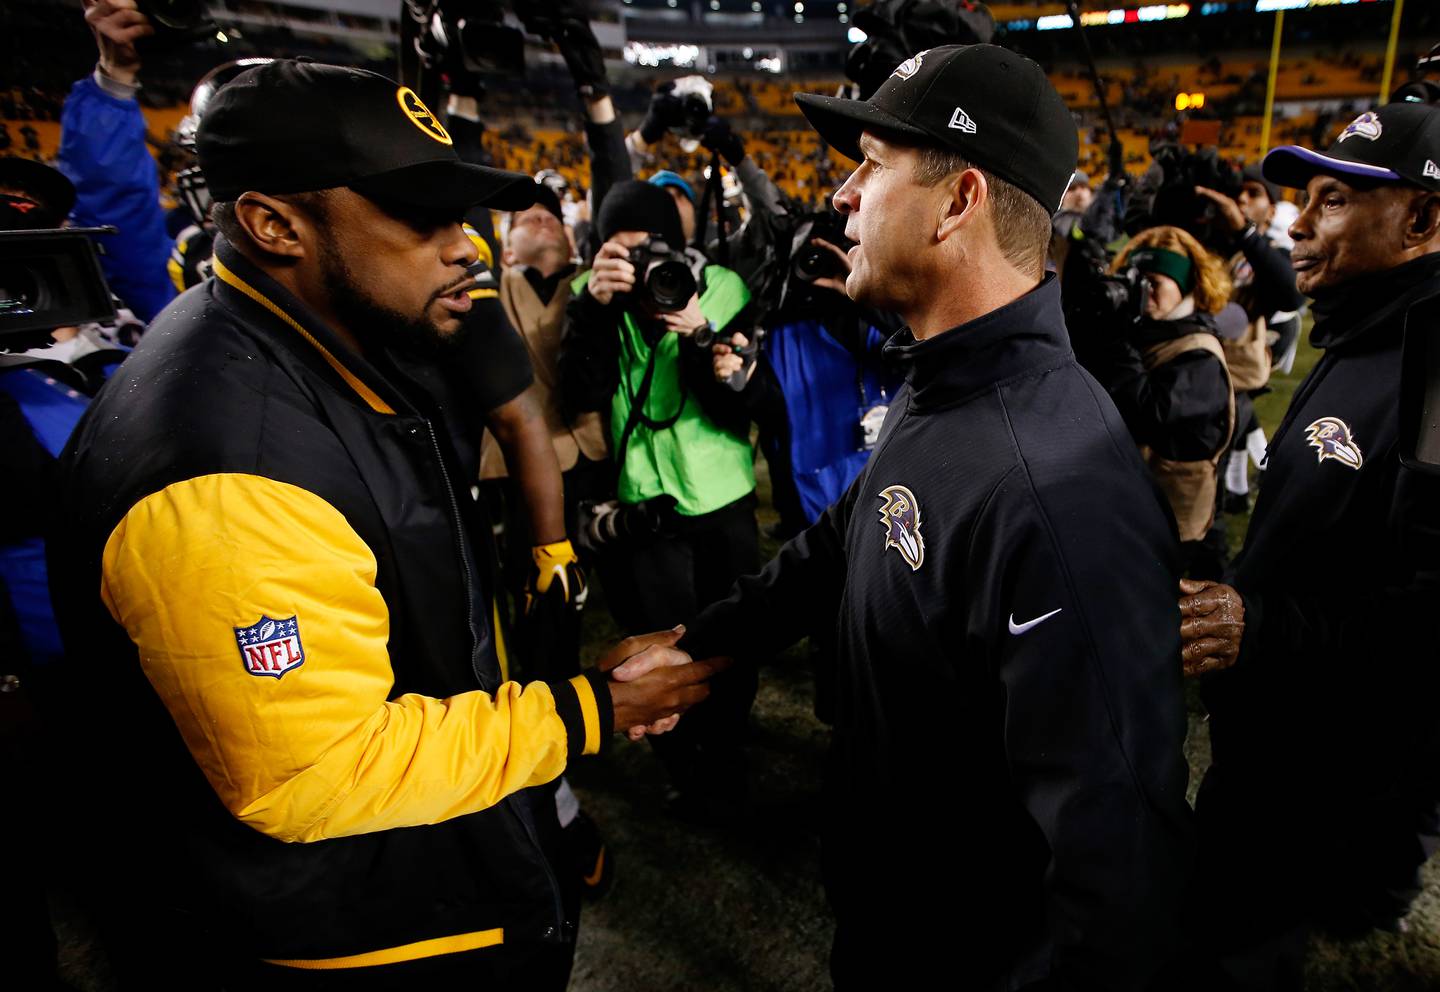 PITTSBURGH, PA - JANUARY 03: Head coach Mike Tomlin of the Pittsburgh Steelers meets head coach John Harbaugh of the Baltimore Ravens after the Ravens defeated the Steelers 30-17 in their AFC Wild Card game at Heinz Field on January 3, 2015 in Pittsburgh, Pennsylvania.